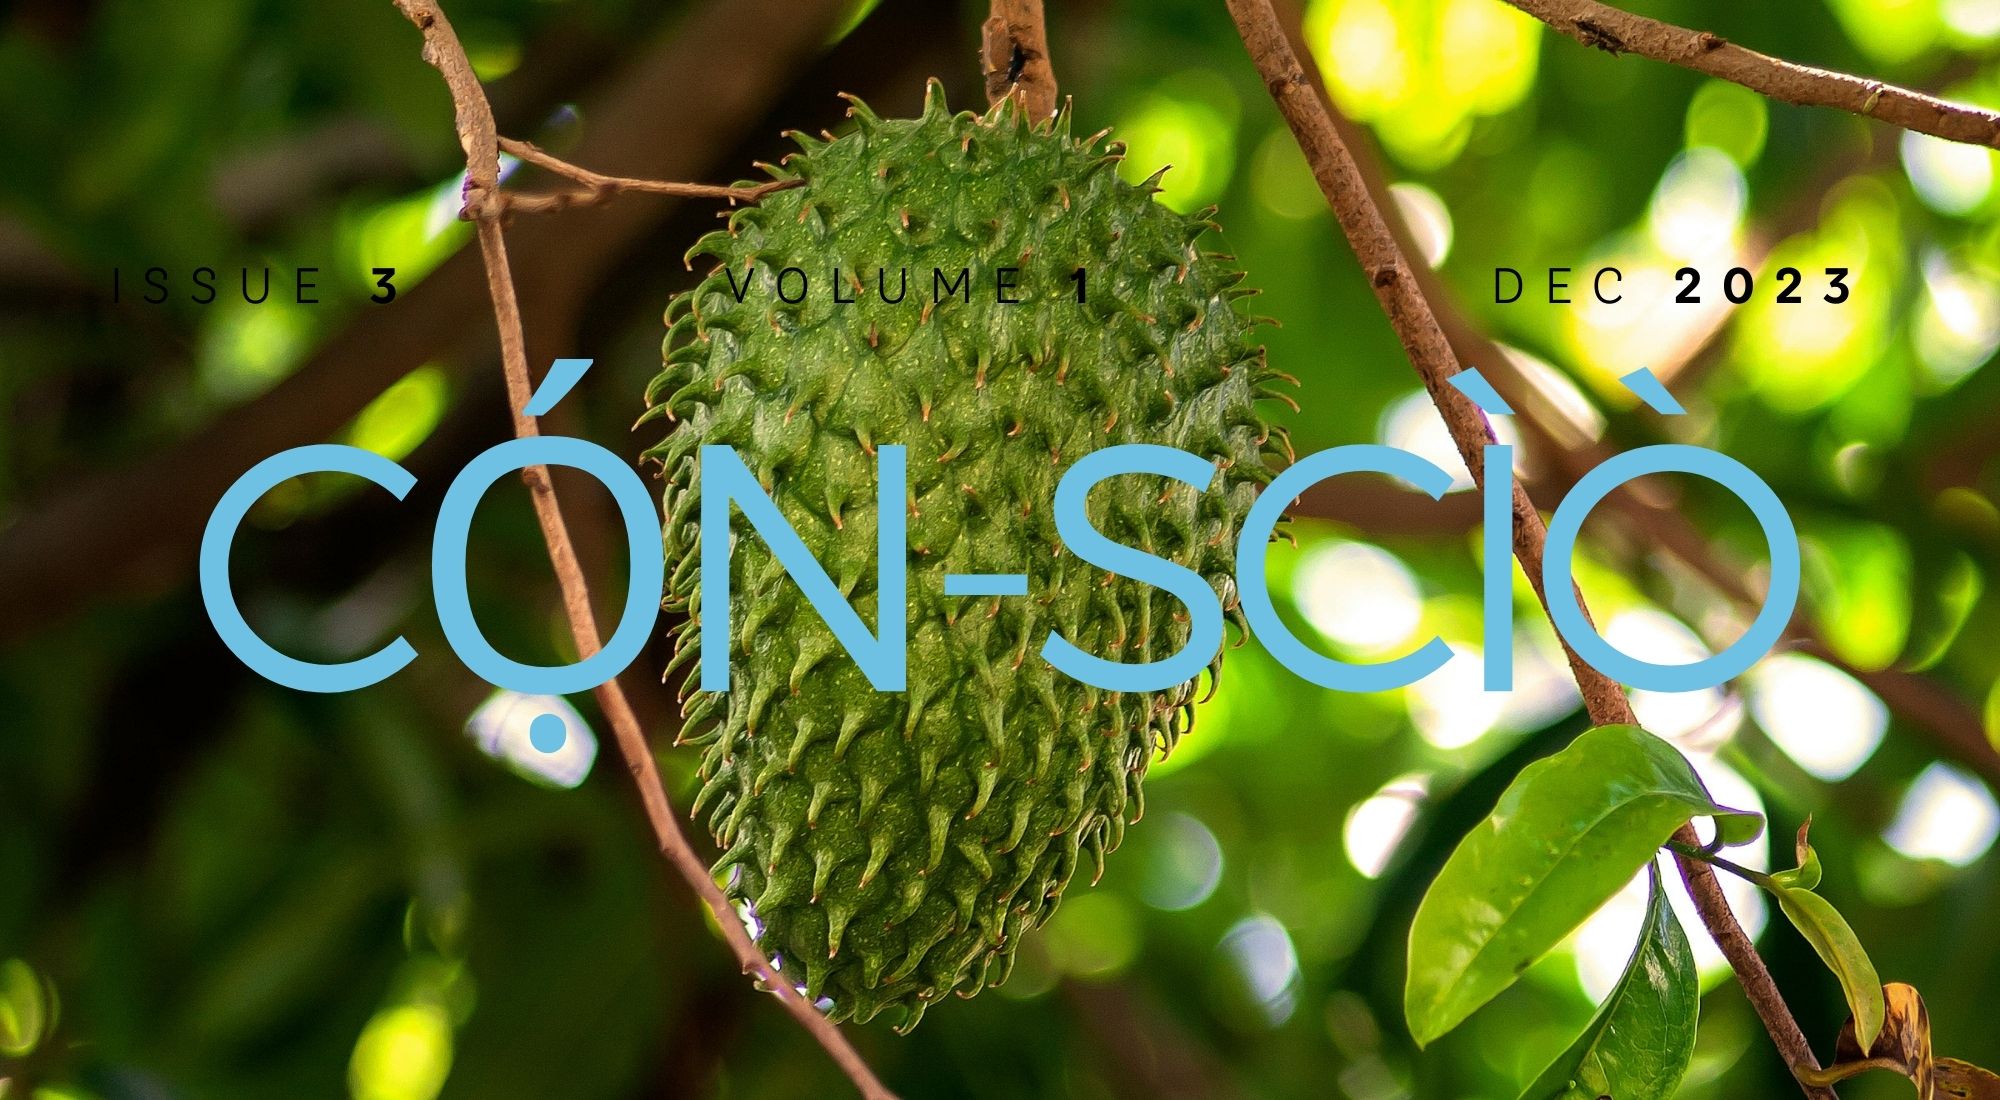 Soursop | a short story by James-Ibe Chinaza